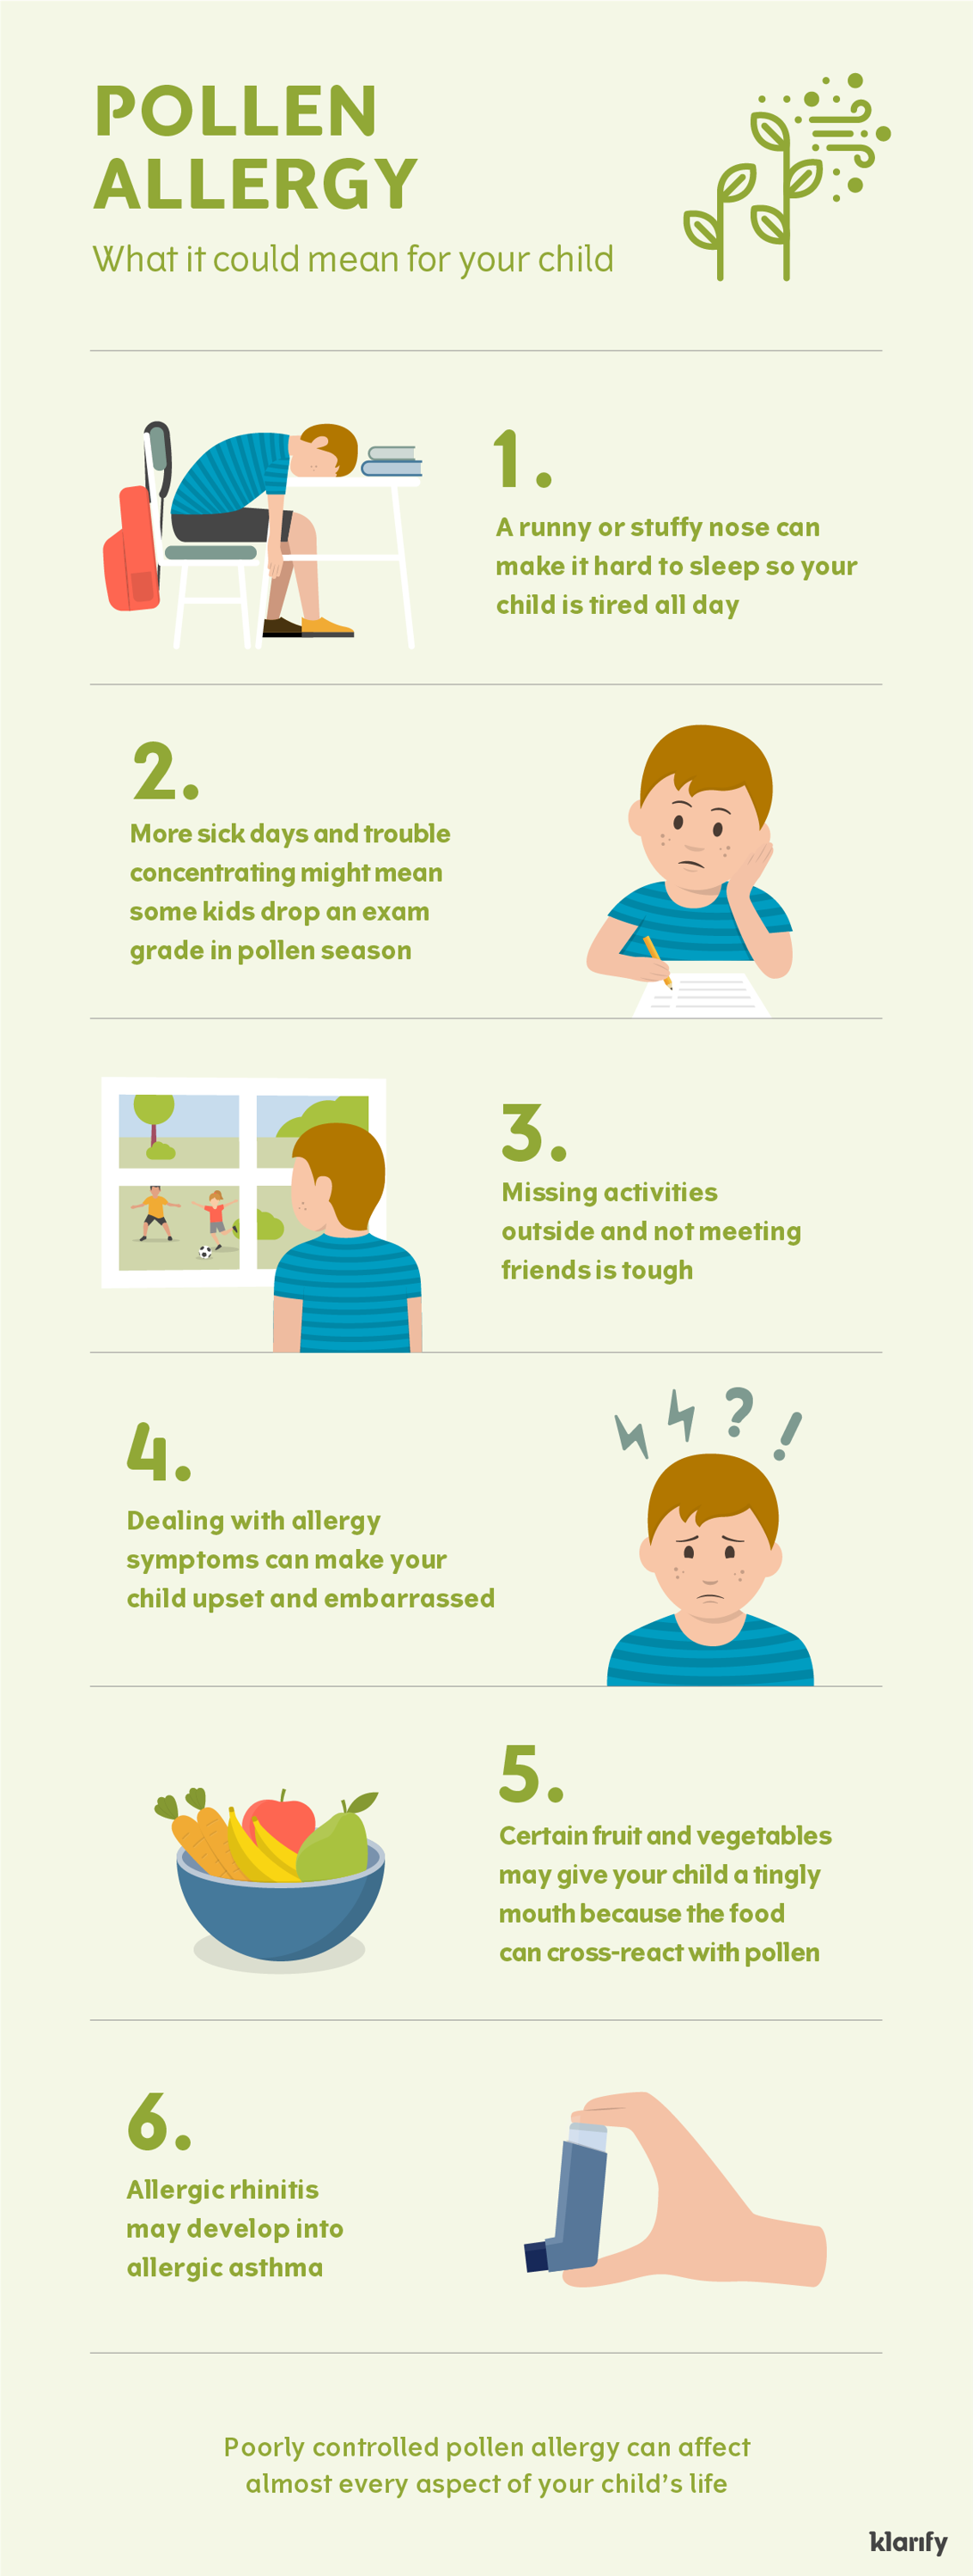 Infographic about the impact of pollen allergy on children. Details of the infographic listed below